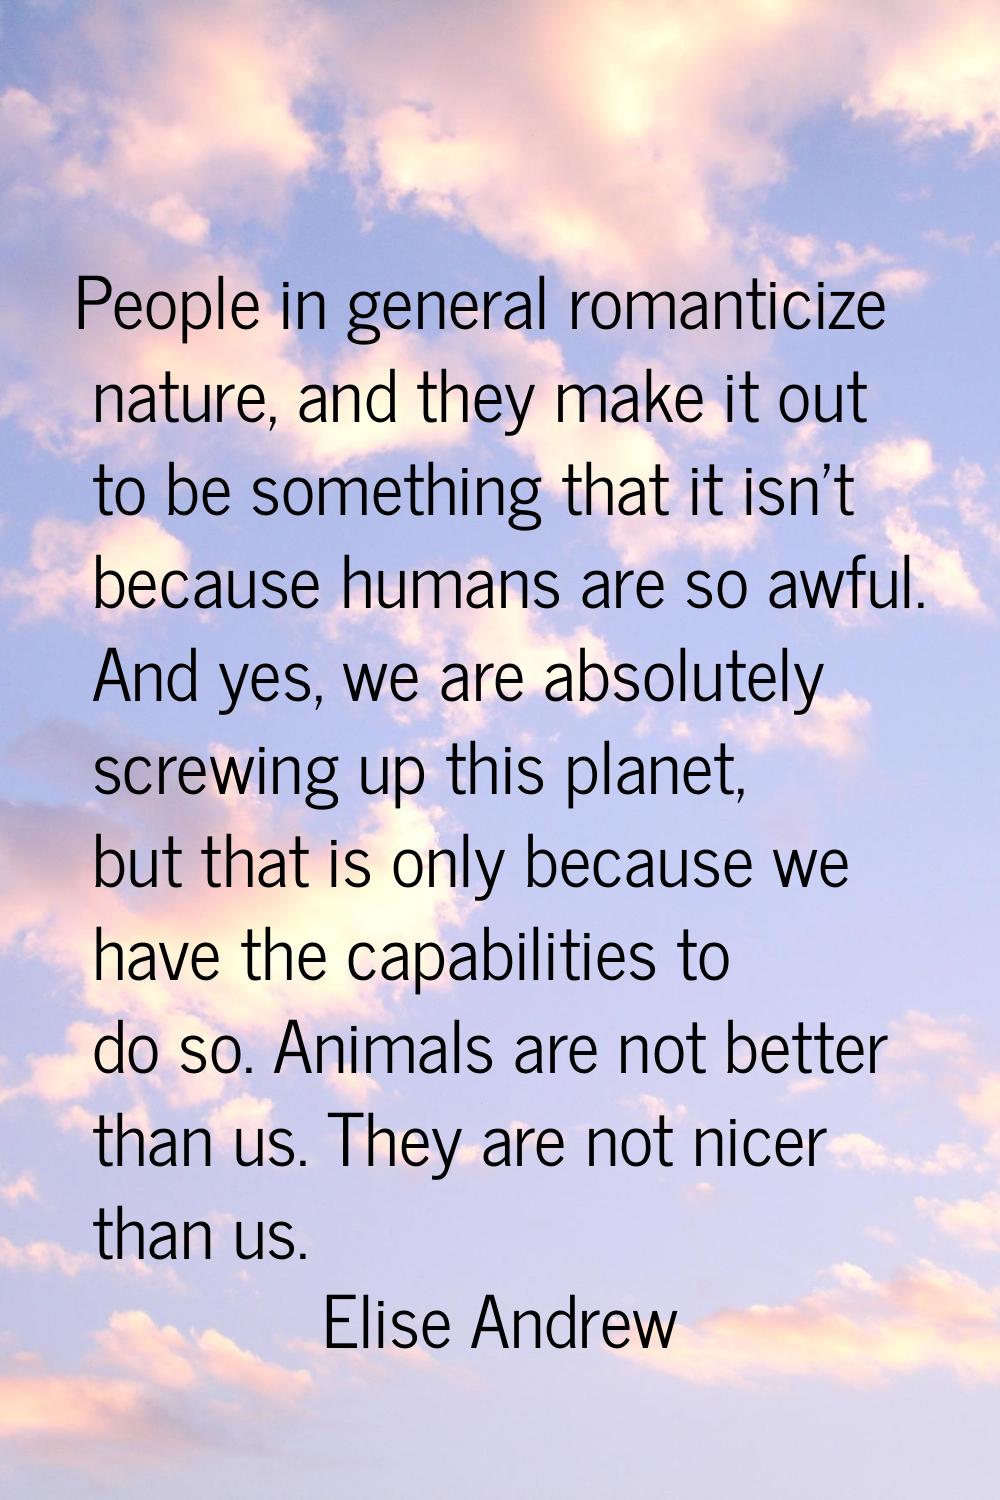 People in general romanticize nature, and they make it out to be something that it isn't because hu